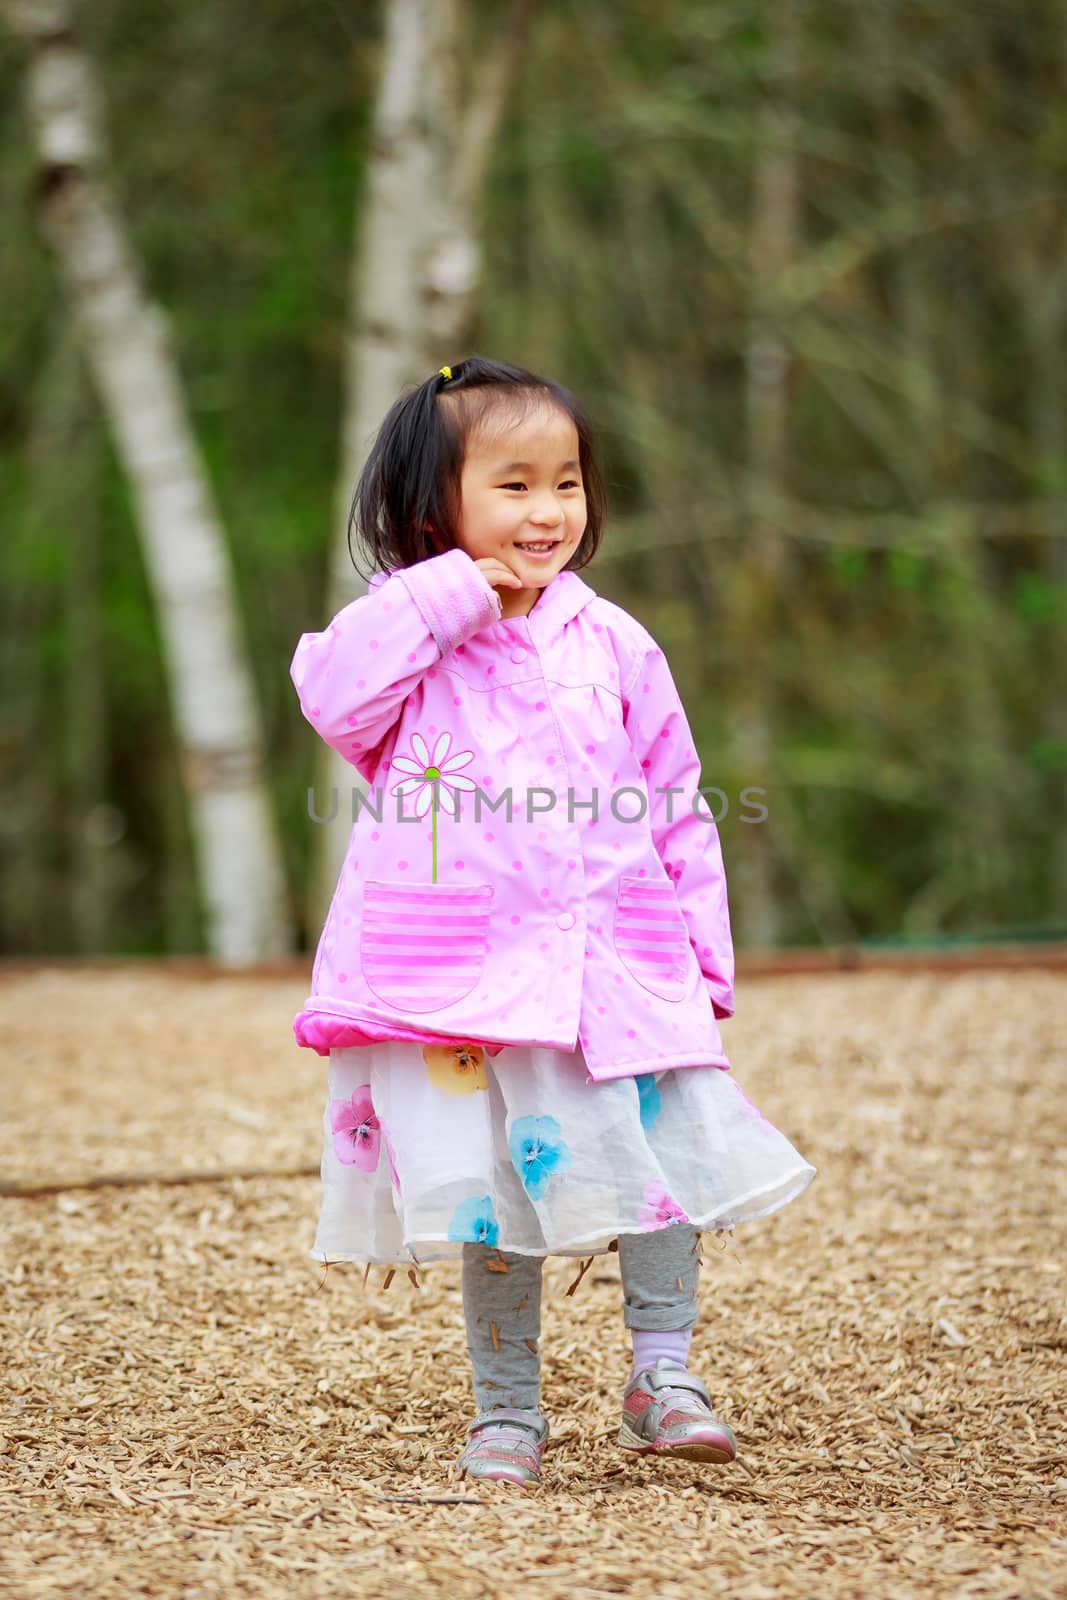 Adorable girl plays in the woods, smiling.